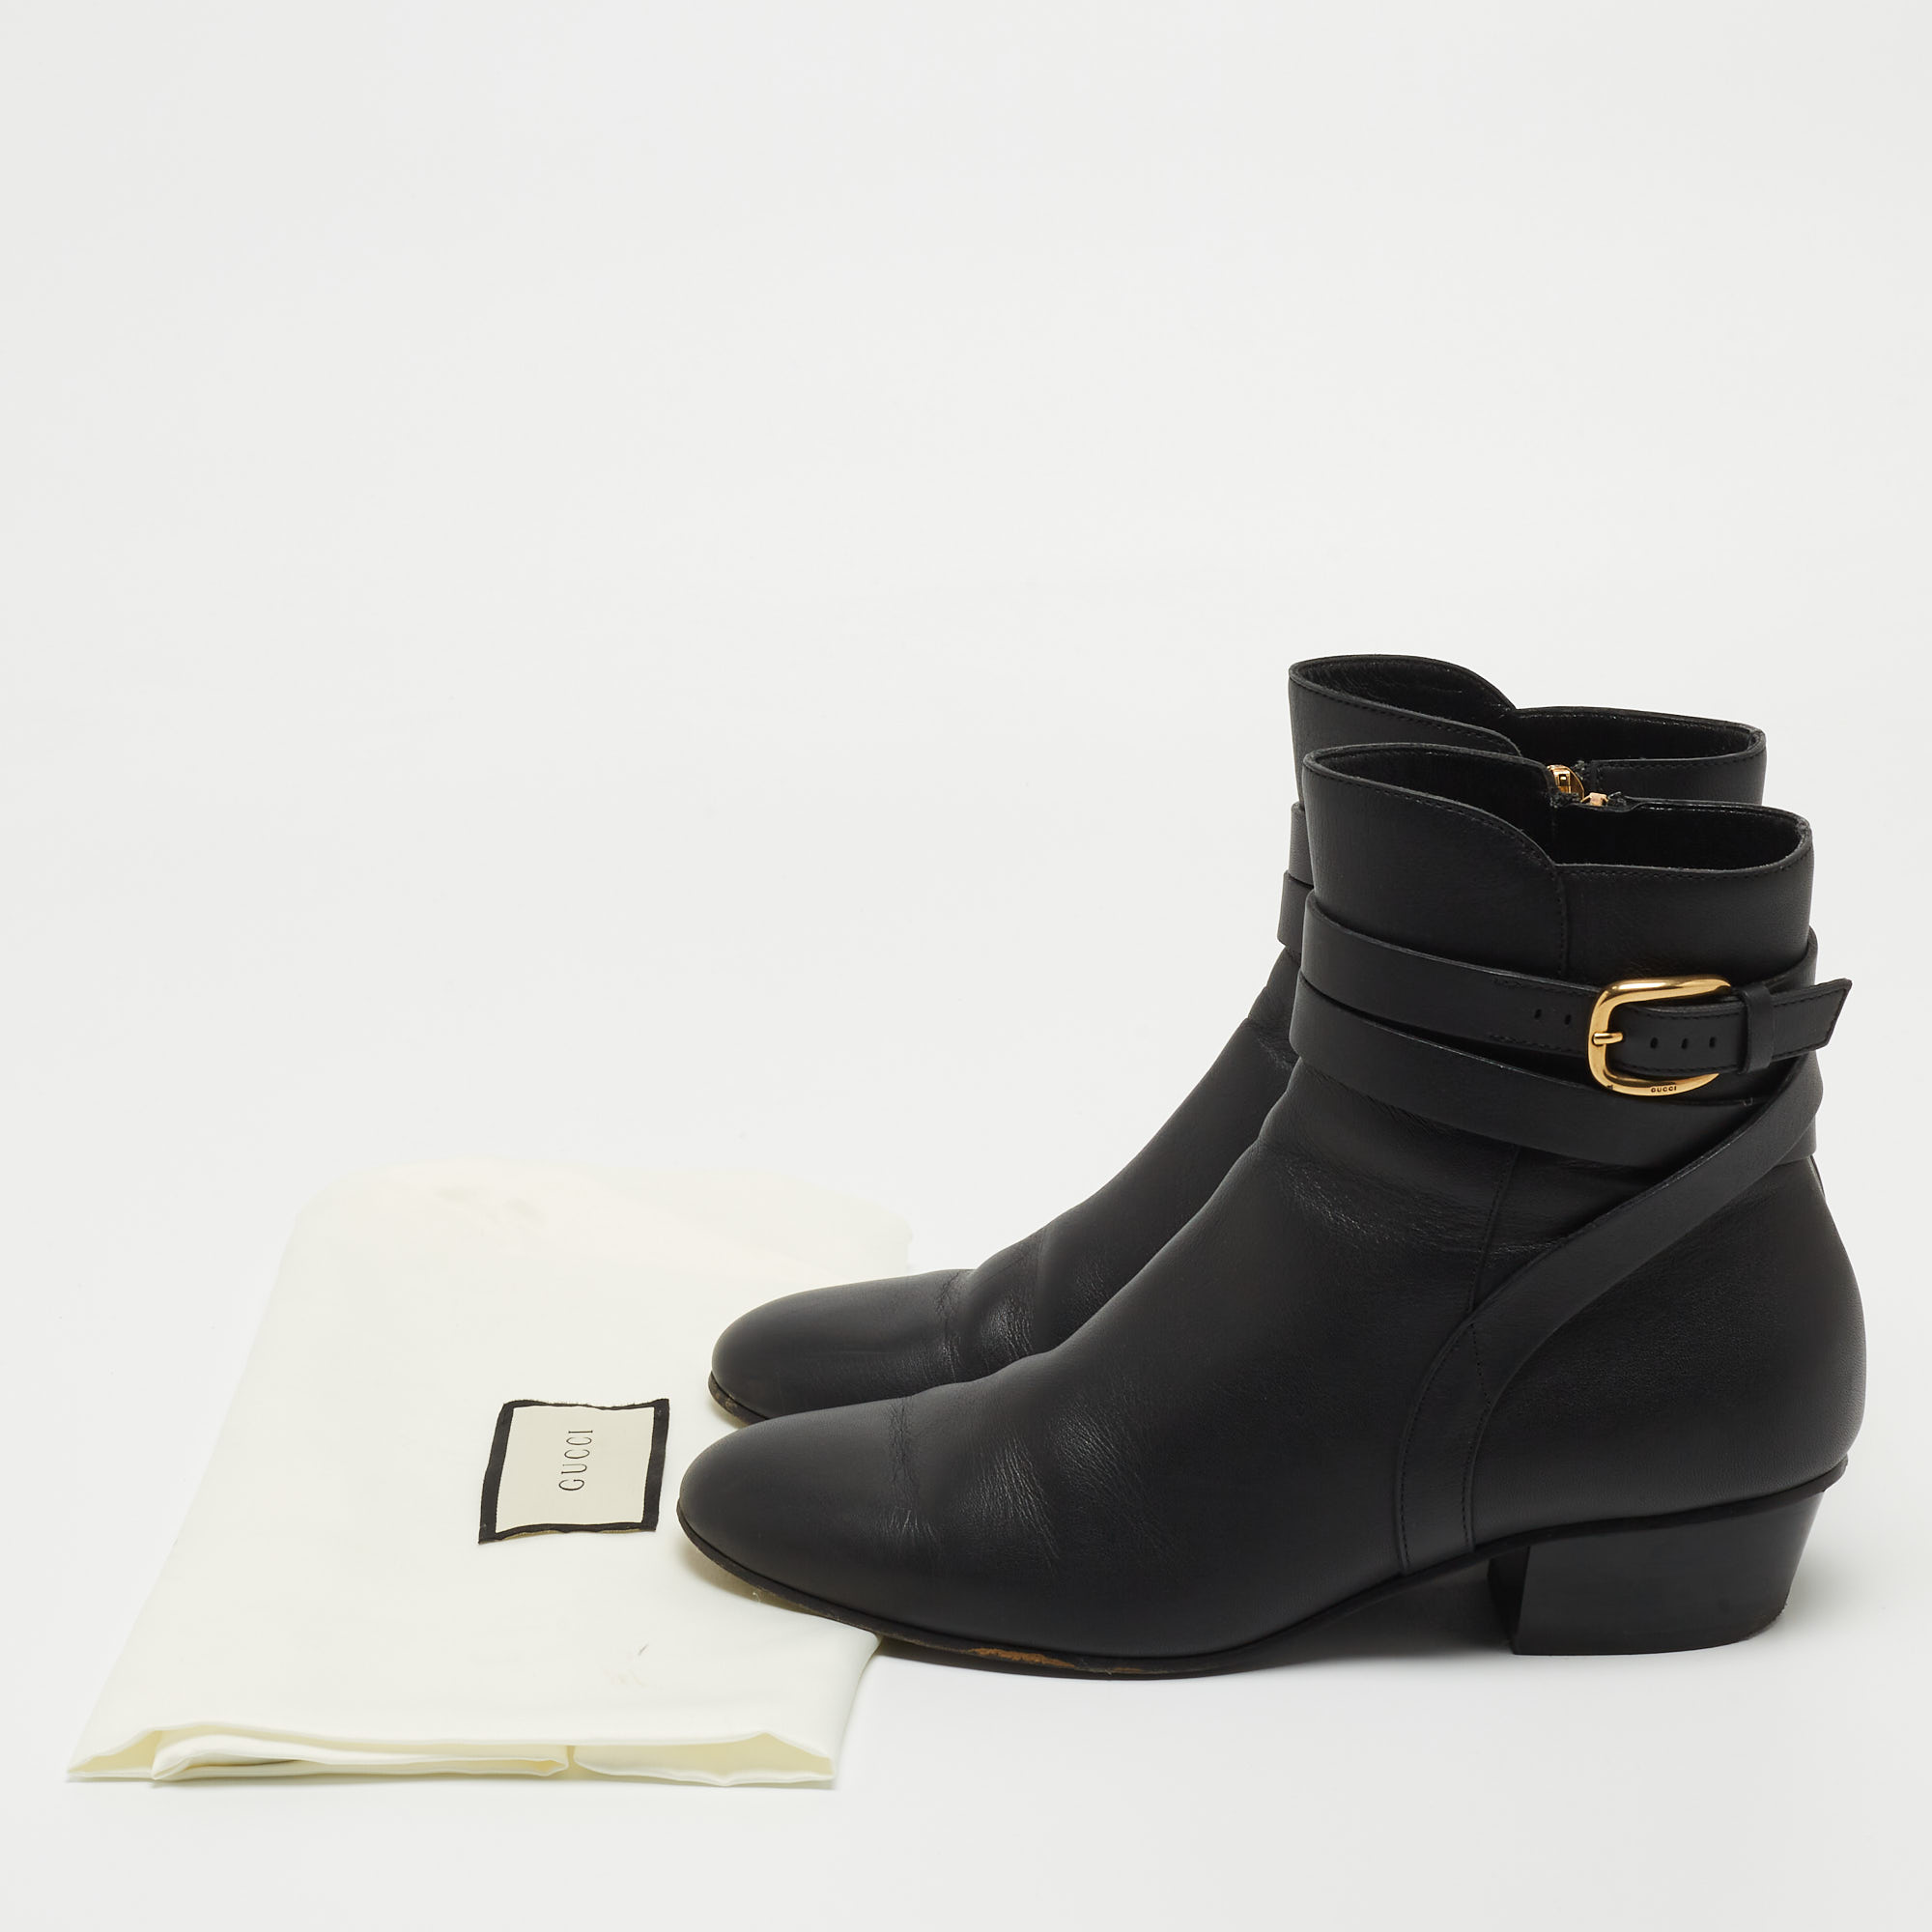 Gucci Black Leather Buckle Detail Ankle Booties Size 36.5